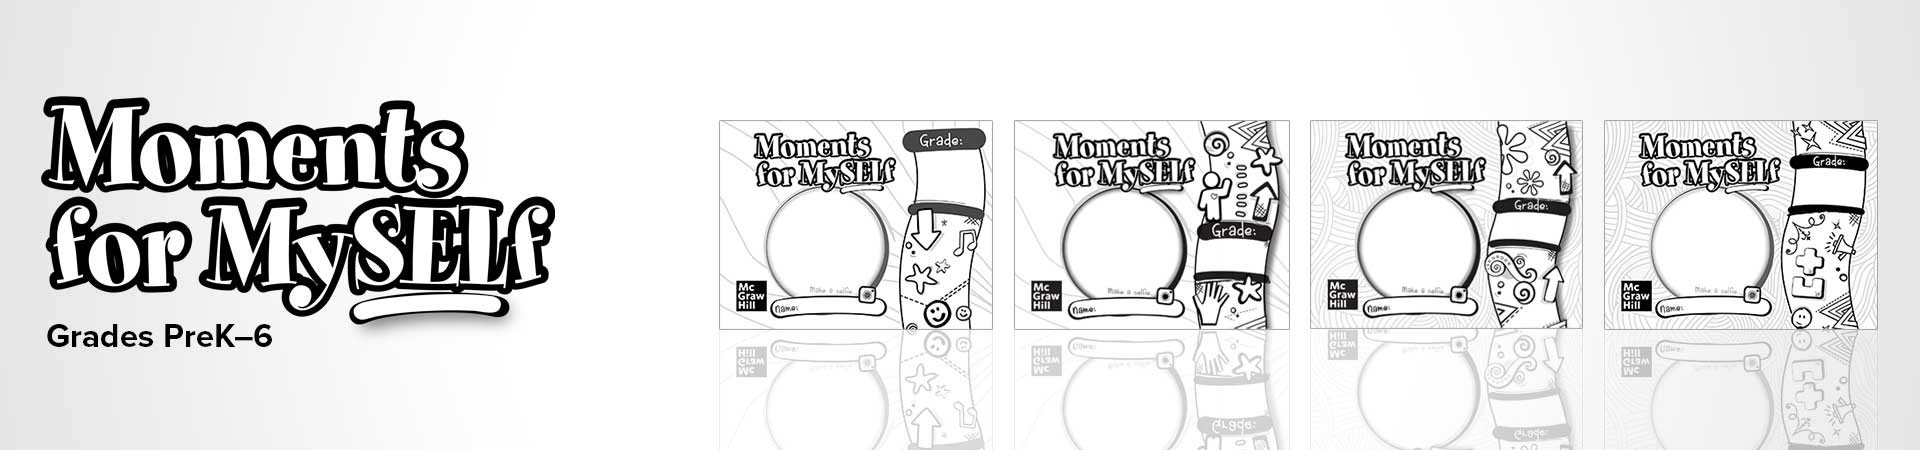 Moments for MySELf Grades PreK-6 logo and covers